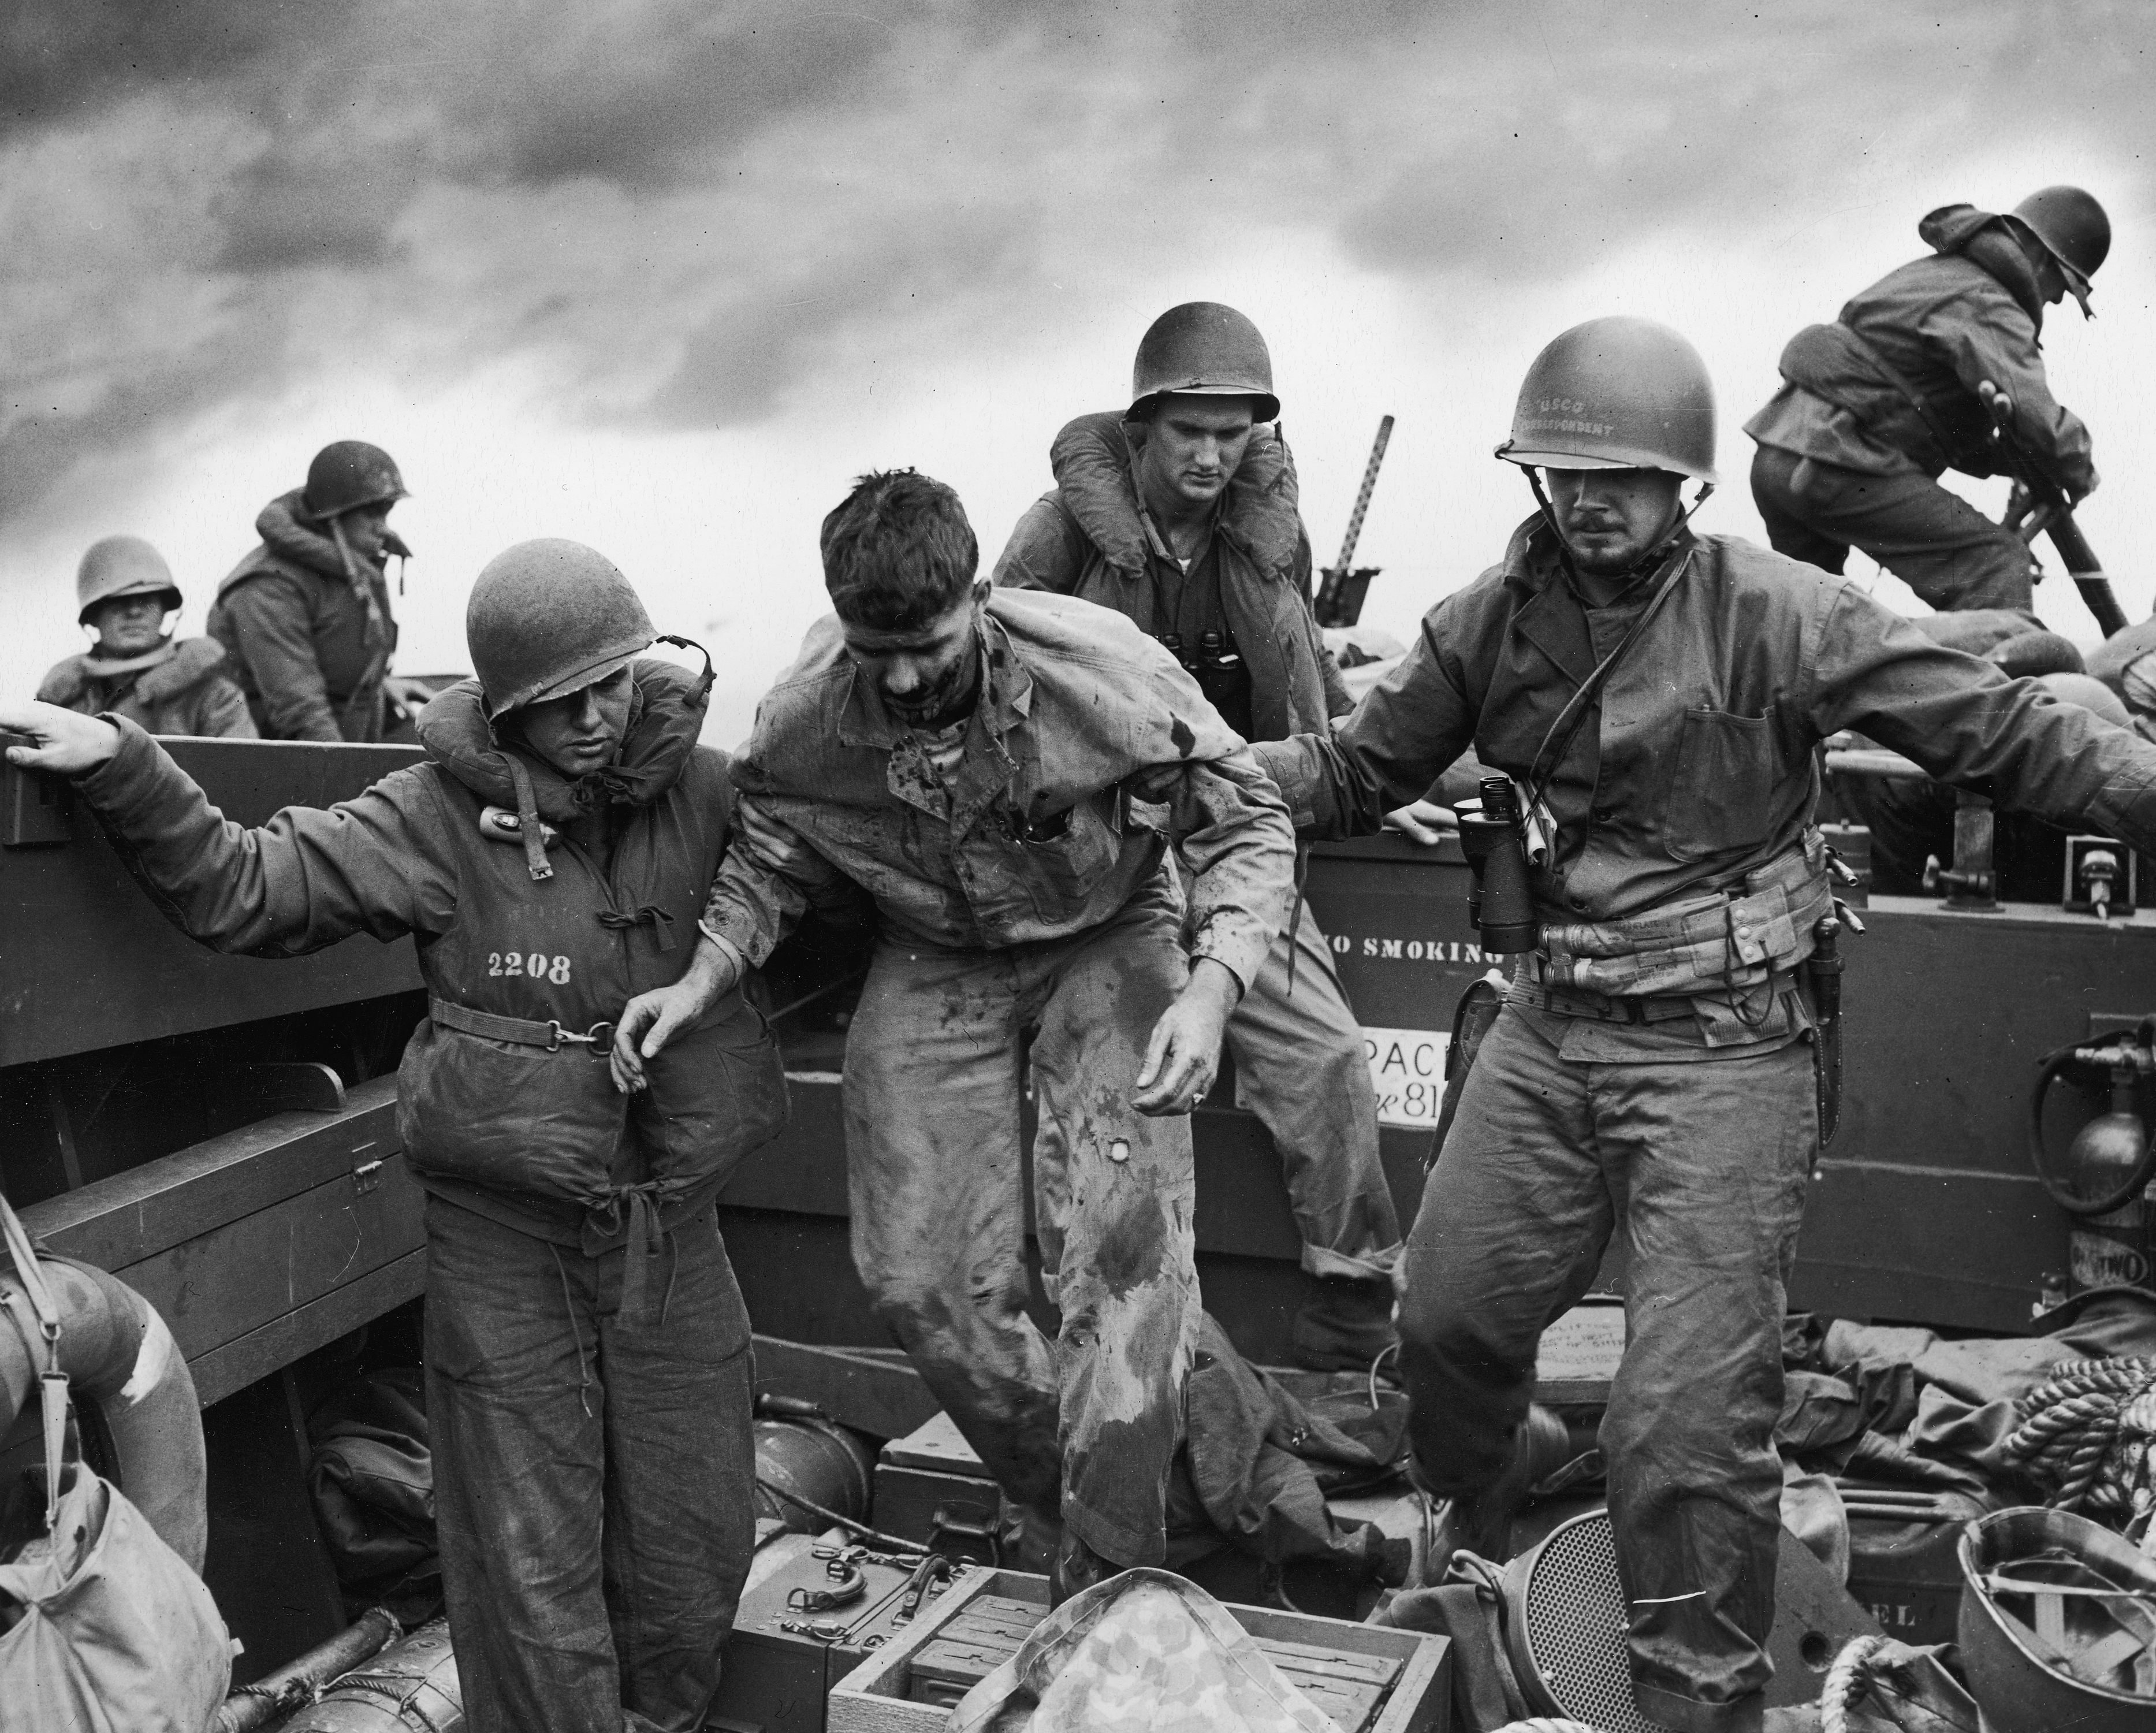 U. S. Coast Guardsmen assist a wounded Marine returning from the fight on Iwo Jima, 1945.